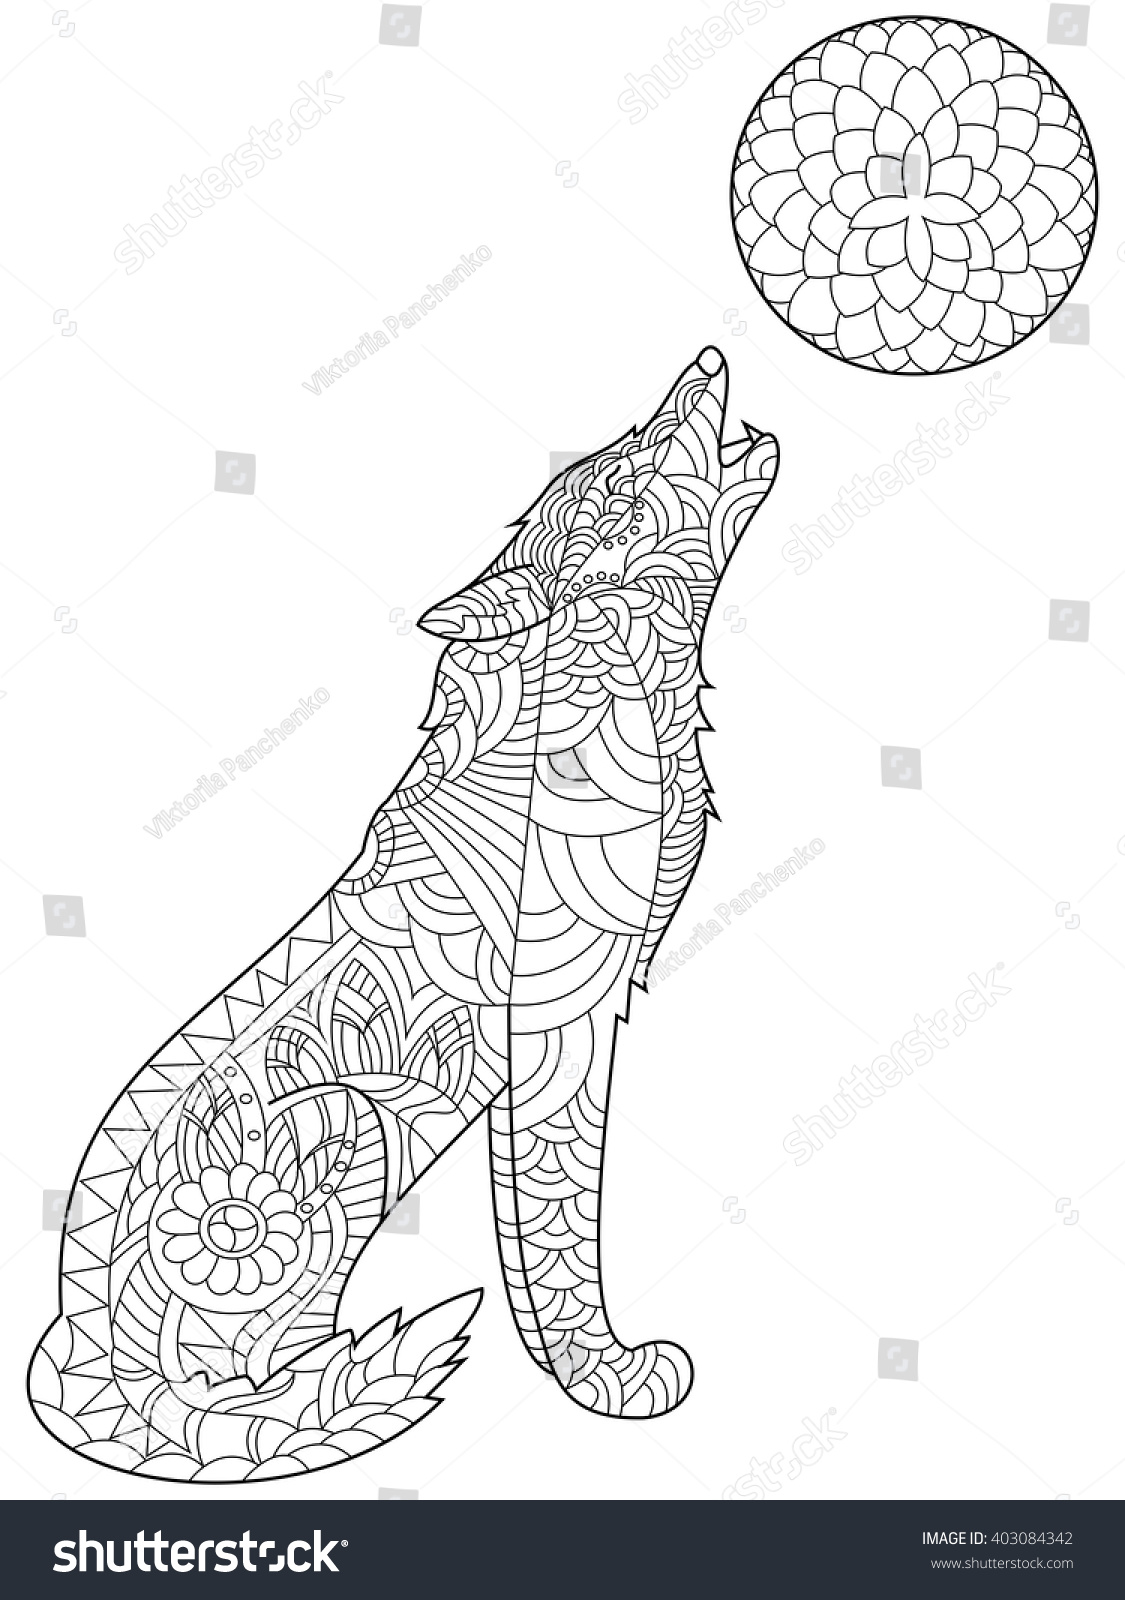 SVG of Wolf coloring book for adults vector illustration. Anti-stress coloring for adult. Zentangle style. Black and white lines. Lace pattern svg